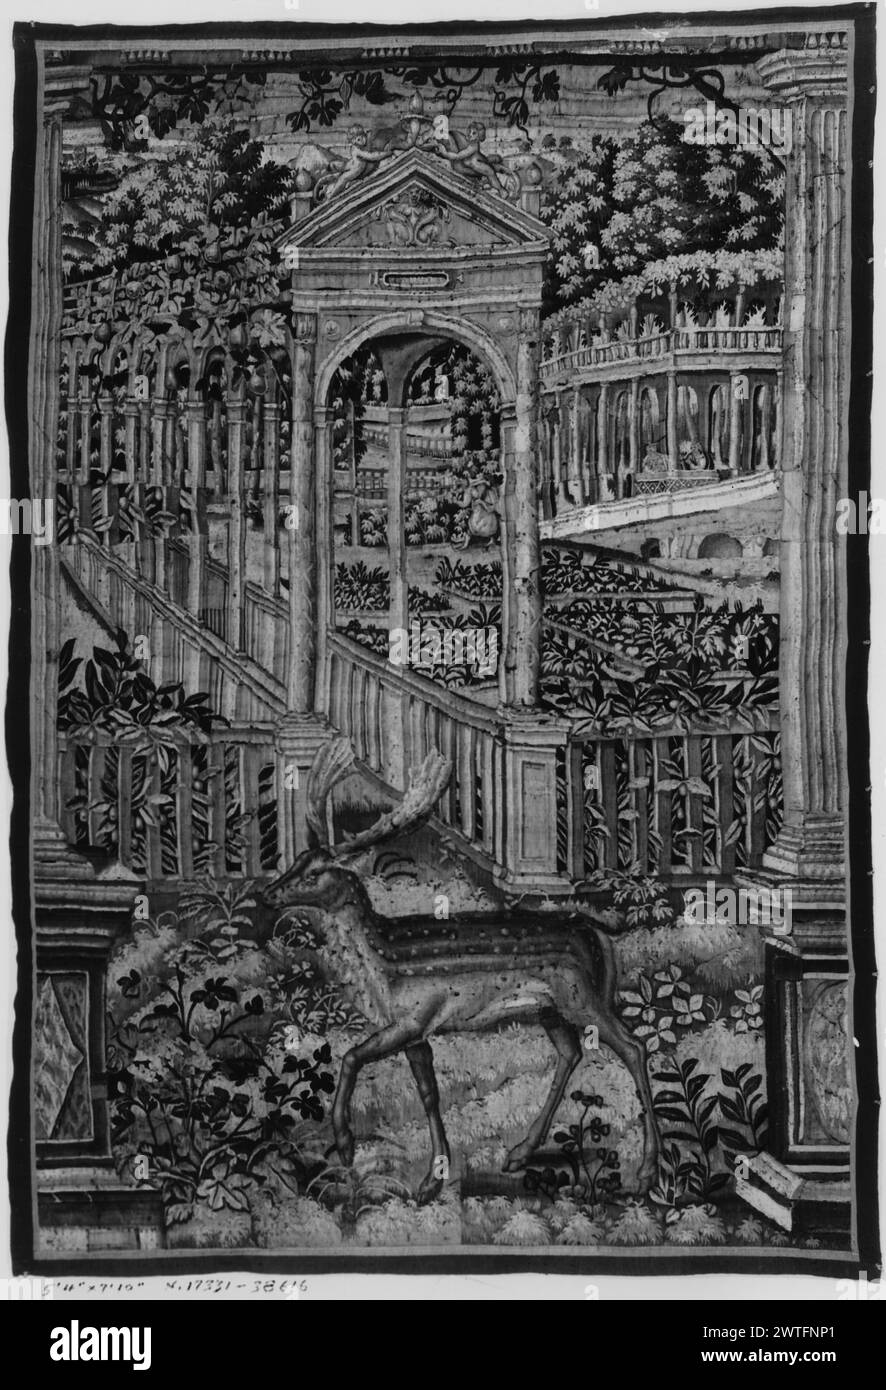 Garden park with stag in front of pergola. unknown c. 1600-1650 Tapestry Dimensions: H 7'10' x W 5'4' Tapestry Materials/Techniques: unknown Culture: Flemish Weaving Center: unknown Ownership History: French & Co. purchased from Grace Rainey Rogers (n.d.; probably 11/1931 or 12/1931); sold to Gimbel Bros. 2/16/1942. Stock Photo